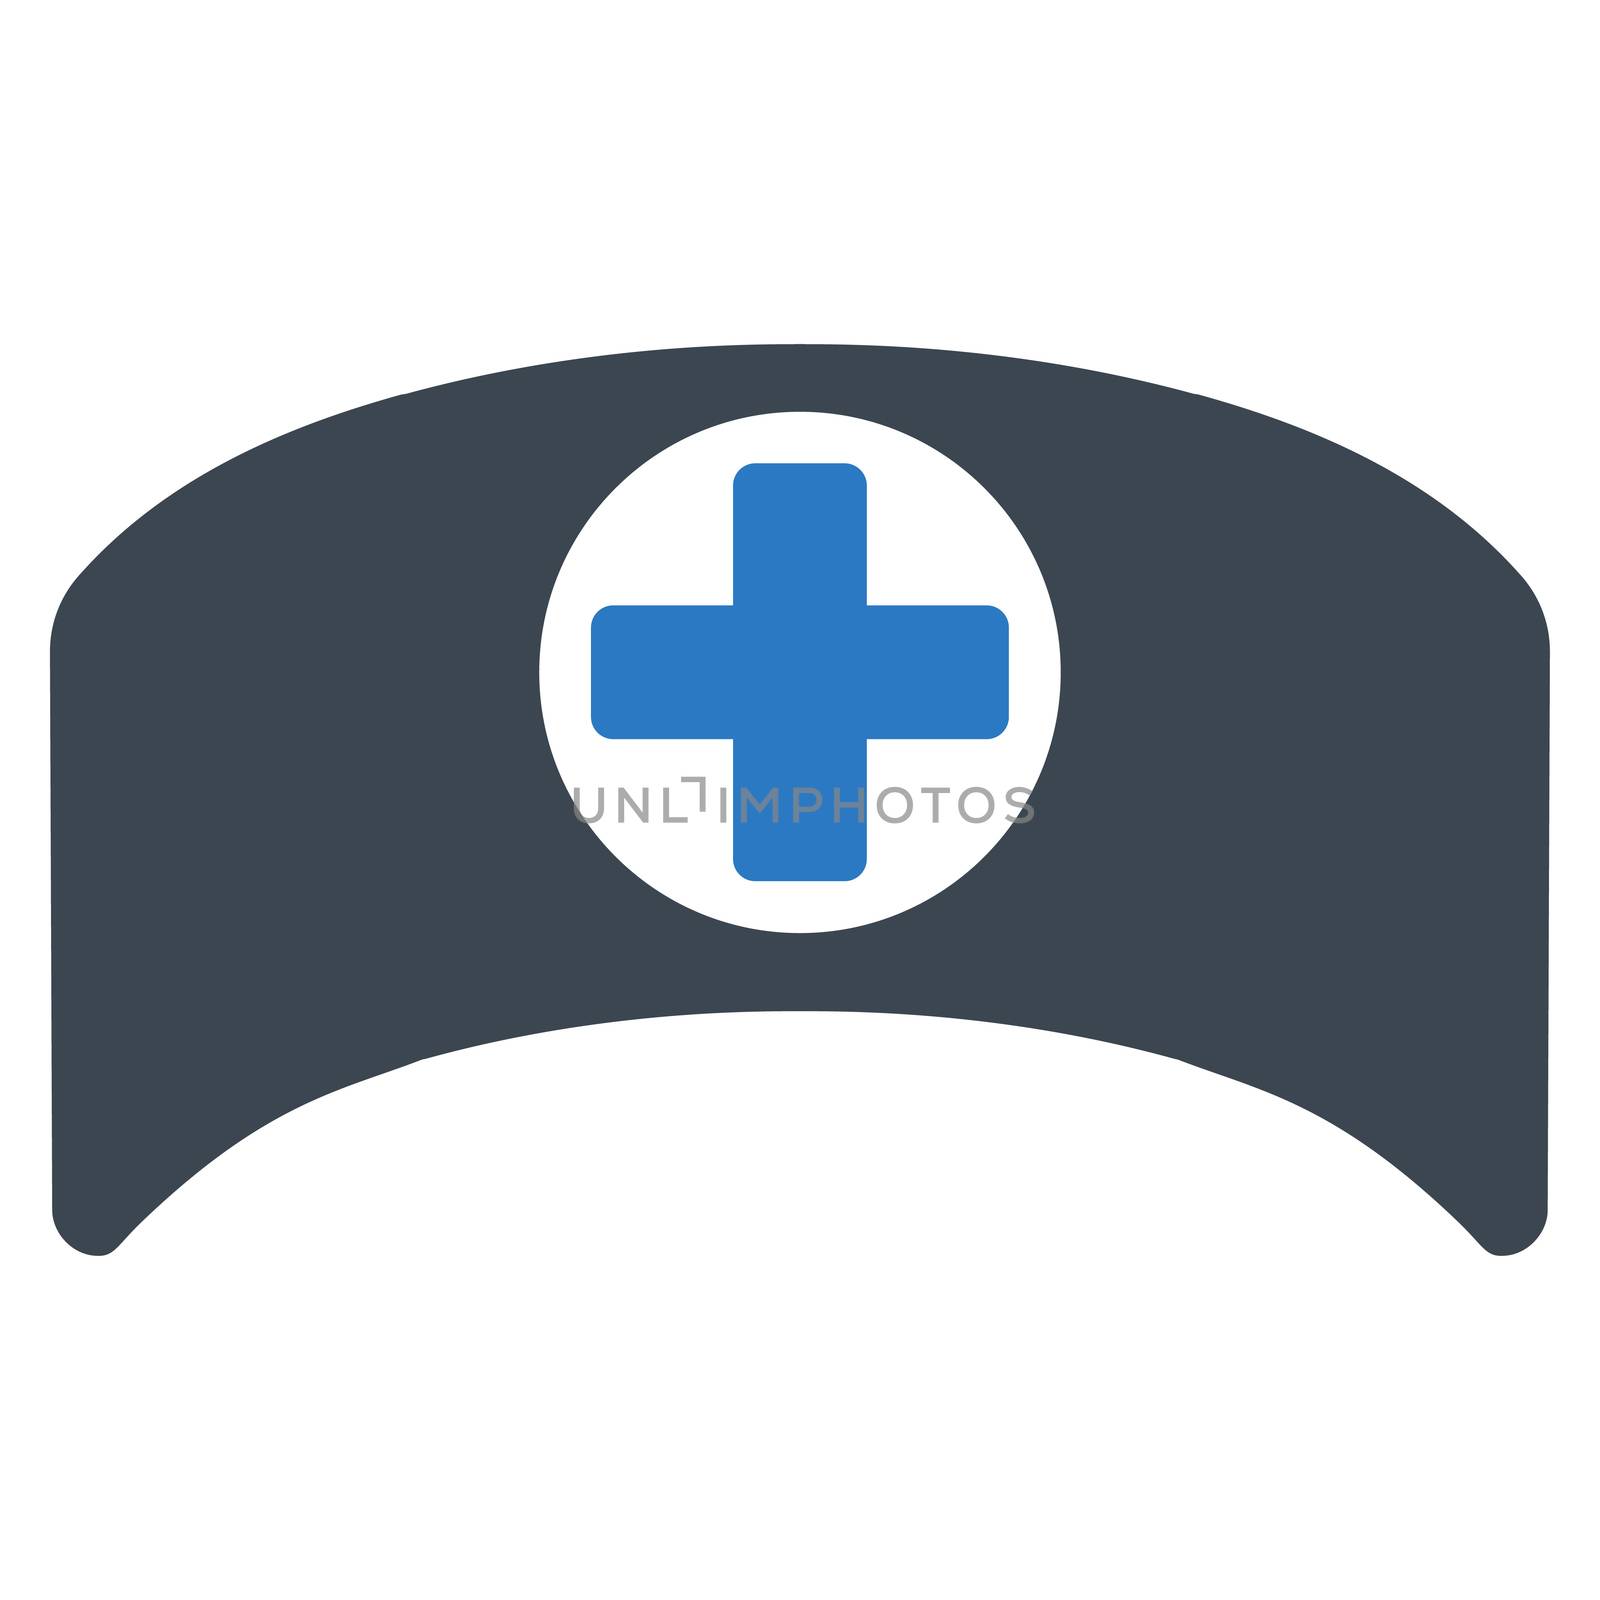 Doctor Cap raster icon. Style is bicolor flat symbol, smooth blue colors, rounded angles, white background.